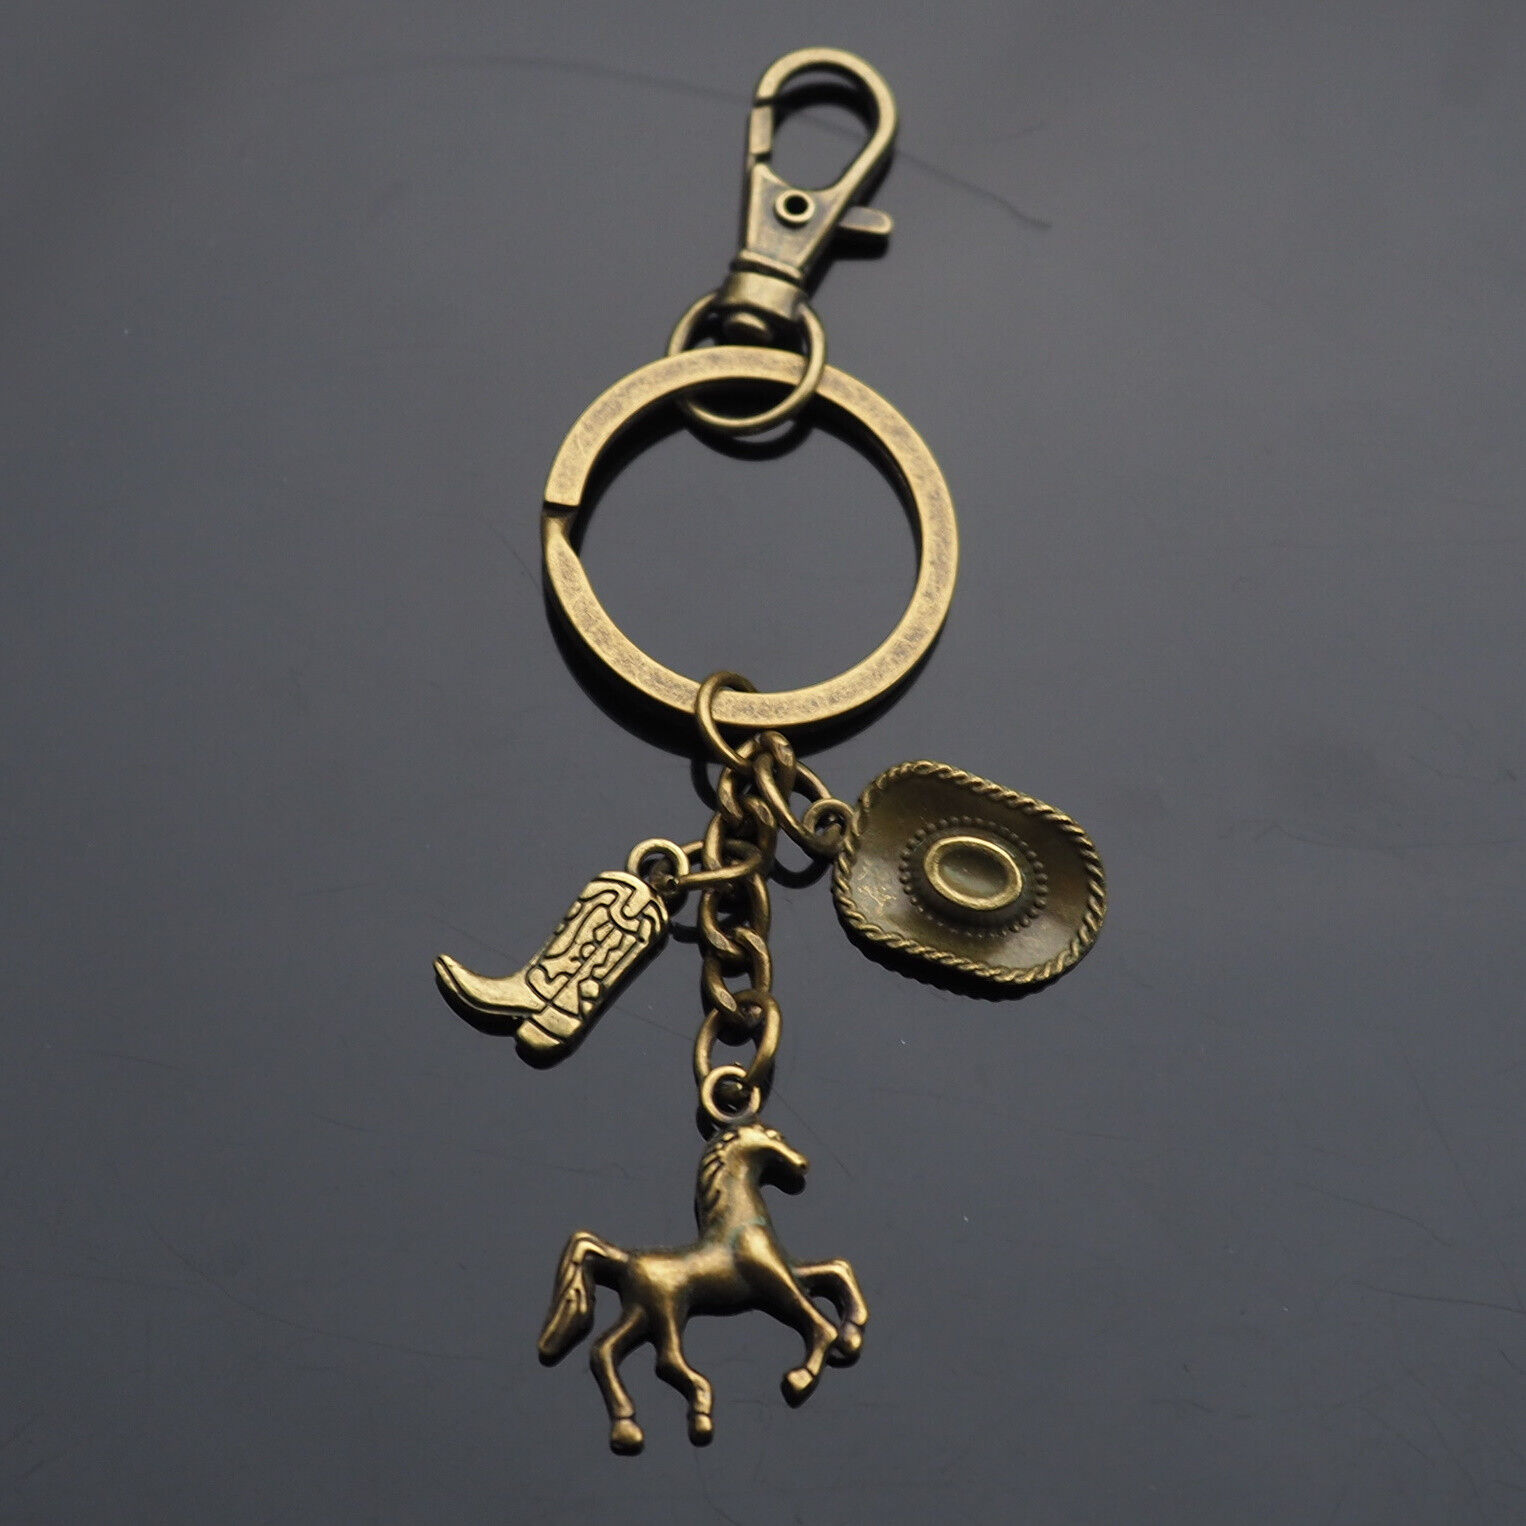 Cowboy Hat Boot Spur Horse Lucky Bronze 3-Charms Pendant Keychain with Clip Gift